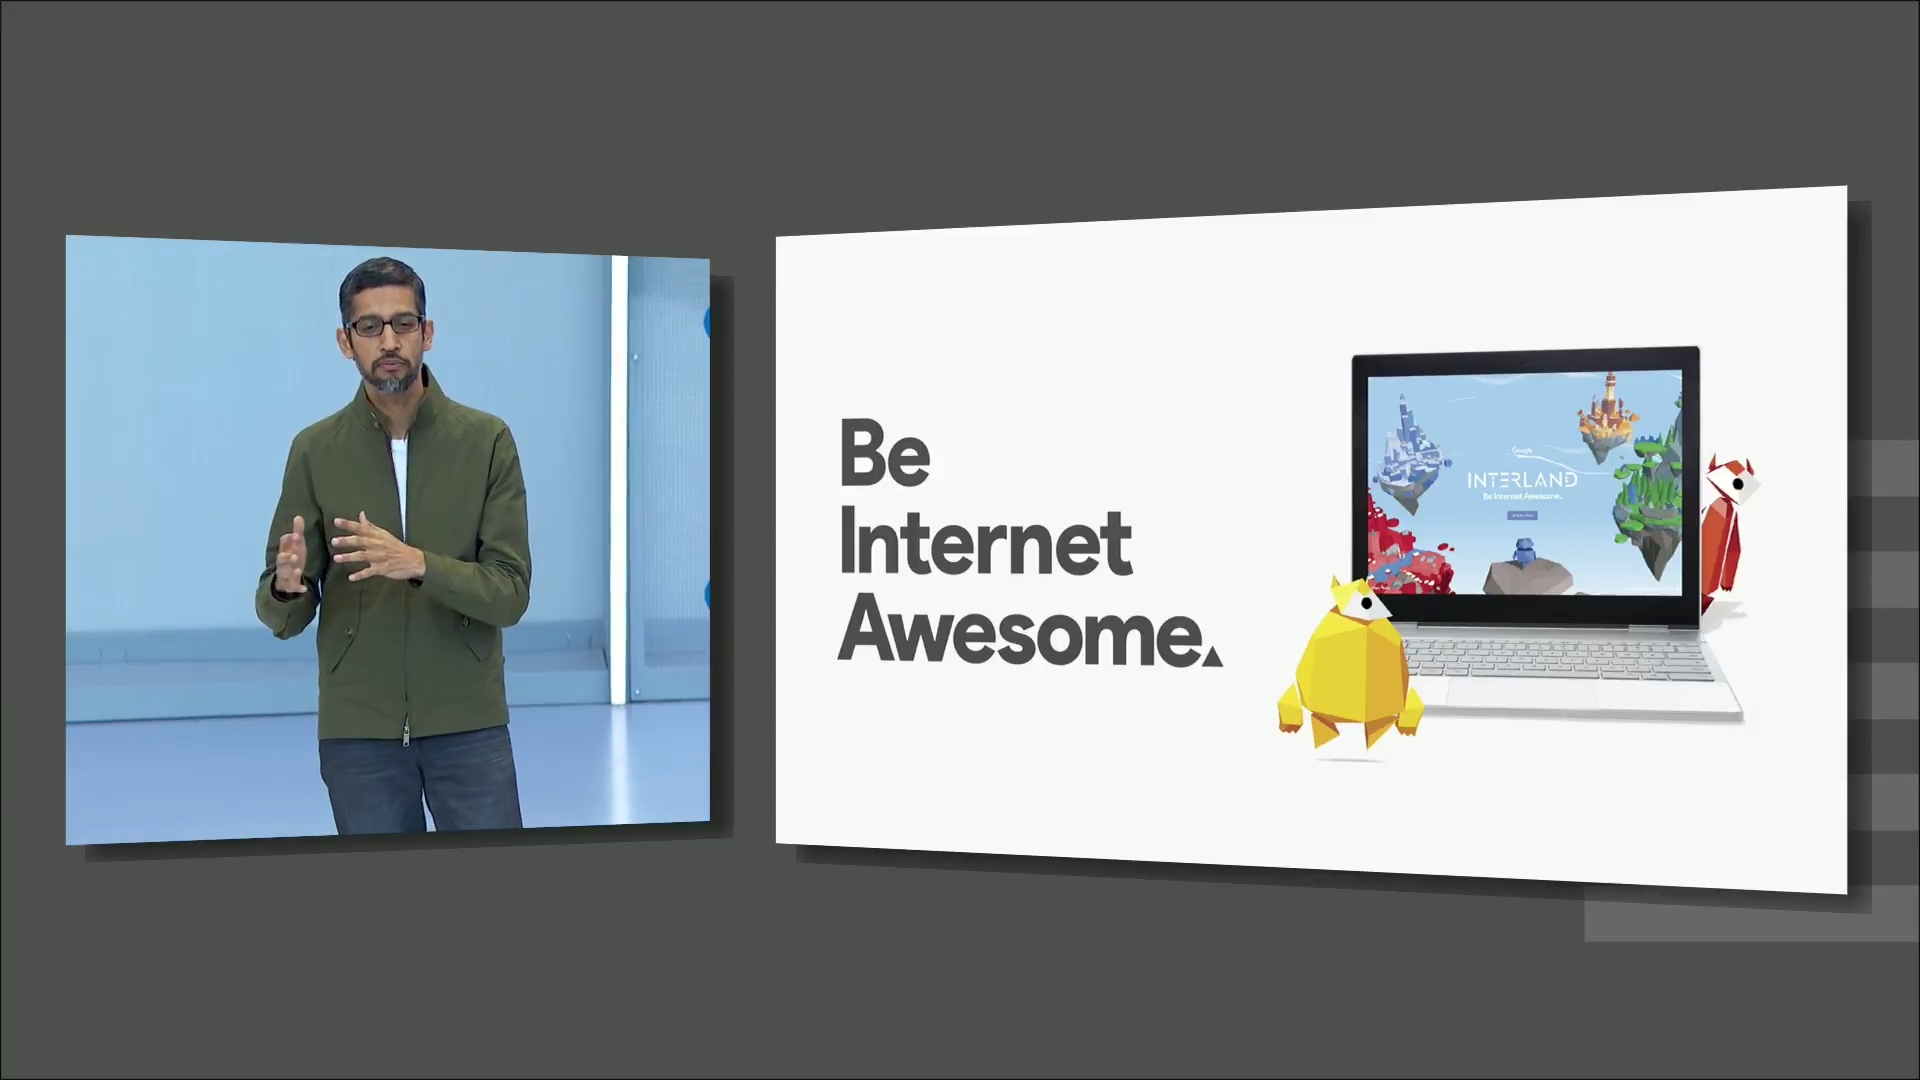 Google CEO Sundar Pichai at Google I/O 2018 beside a &quot;be internet awesome&quot; slogan